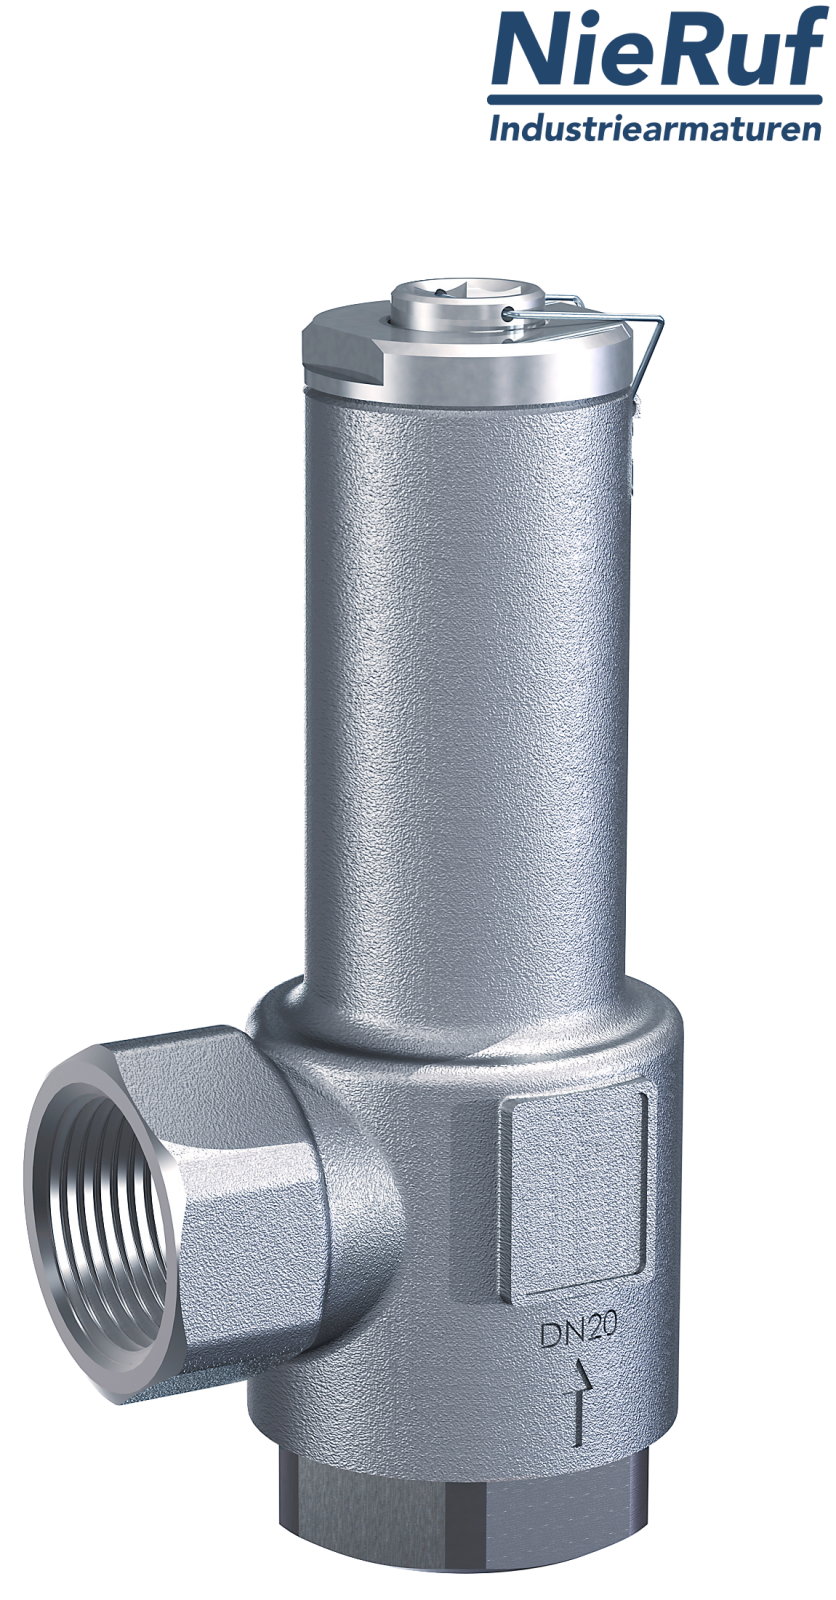 angle-type overflow valve 1 1/4" inch fm UV04 stainless steel AISI 316L 0,5 - 2,5 bar